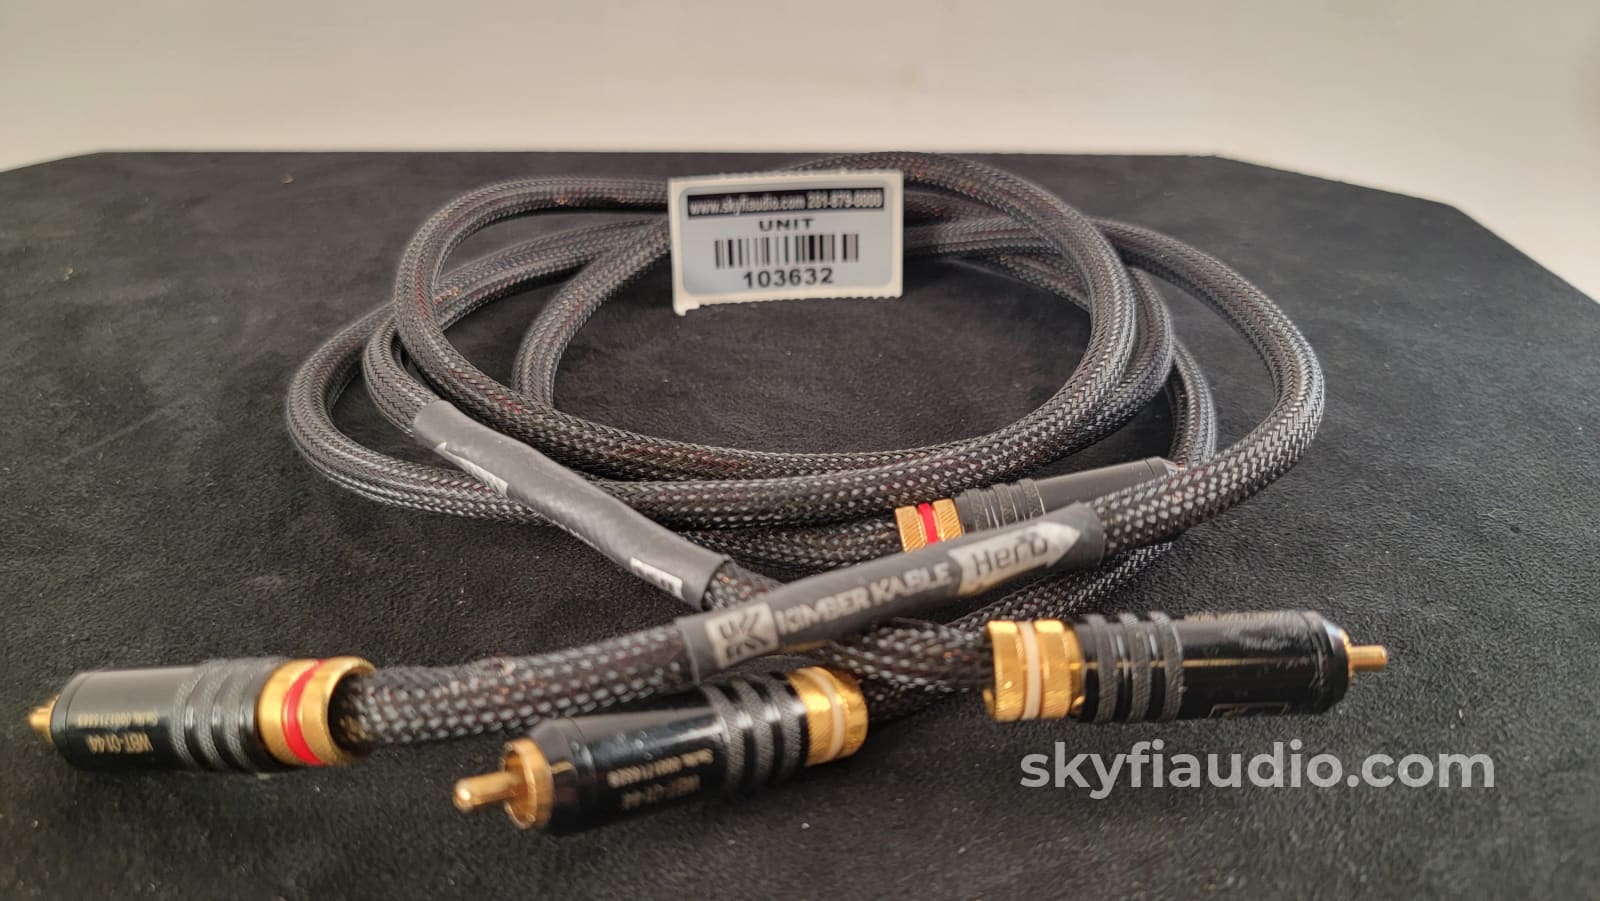 Kimber Kable Hero Rca Interconnects (Pair) With German-Made Wbt Connectors - 1 Meter Cables